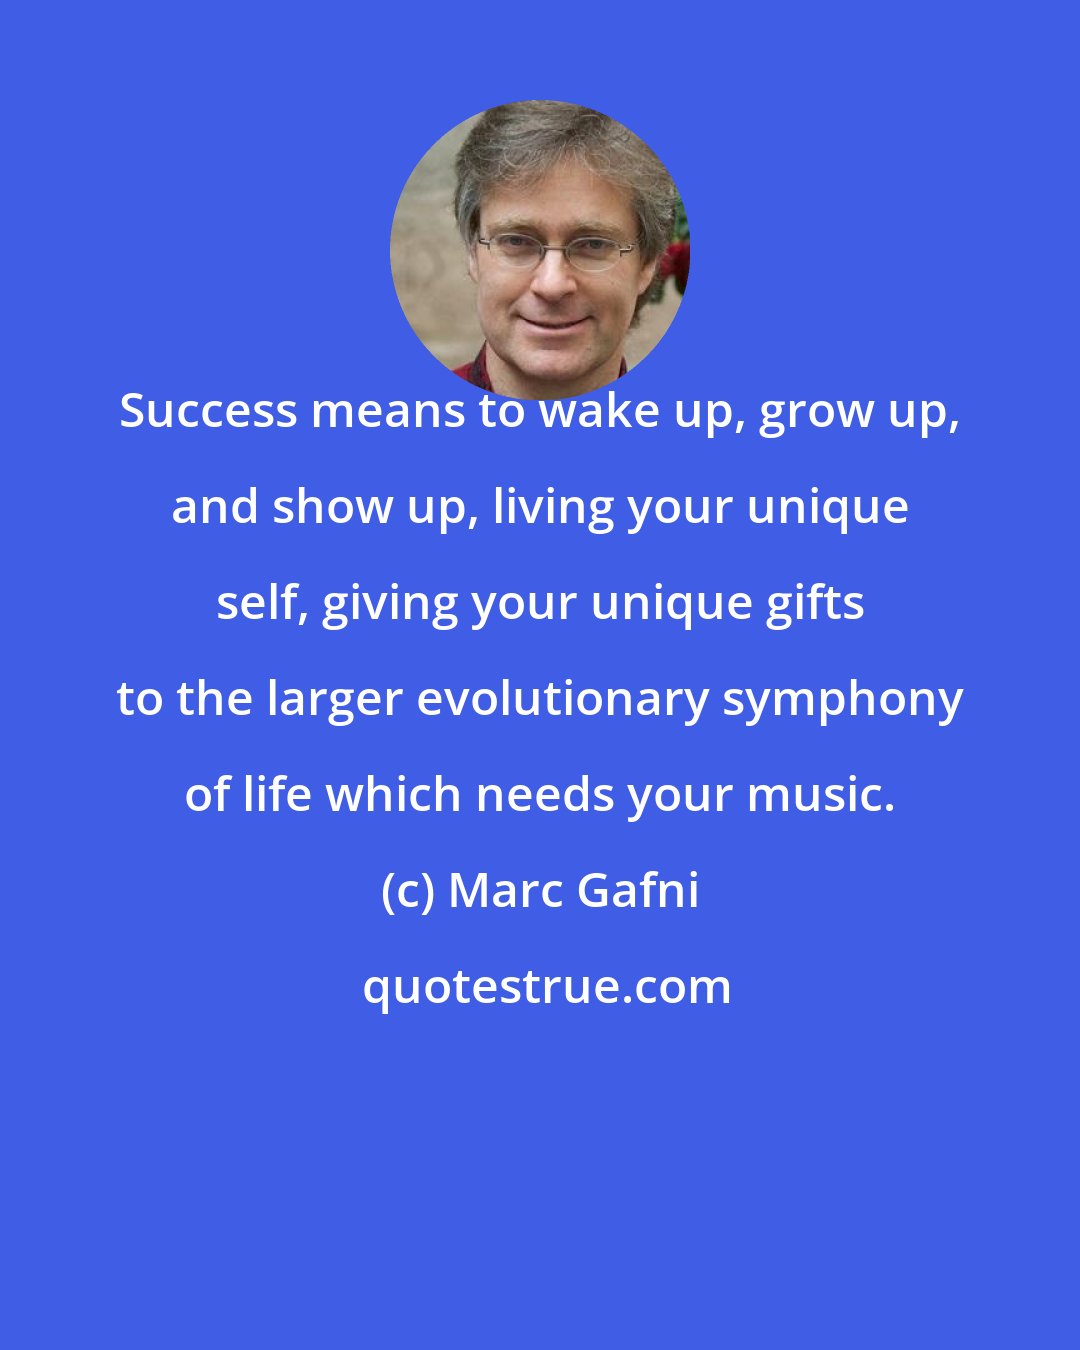 Marc Gafni: Success means to wake up, grow up, and show up, living your unique self, giving your unique gifts to the larger evolutionary symphony of life which needs your music.